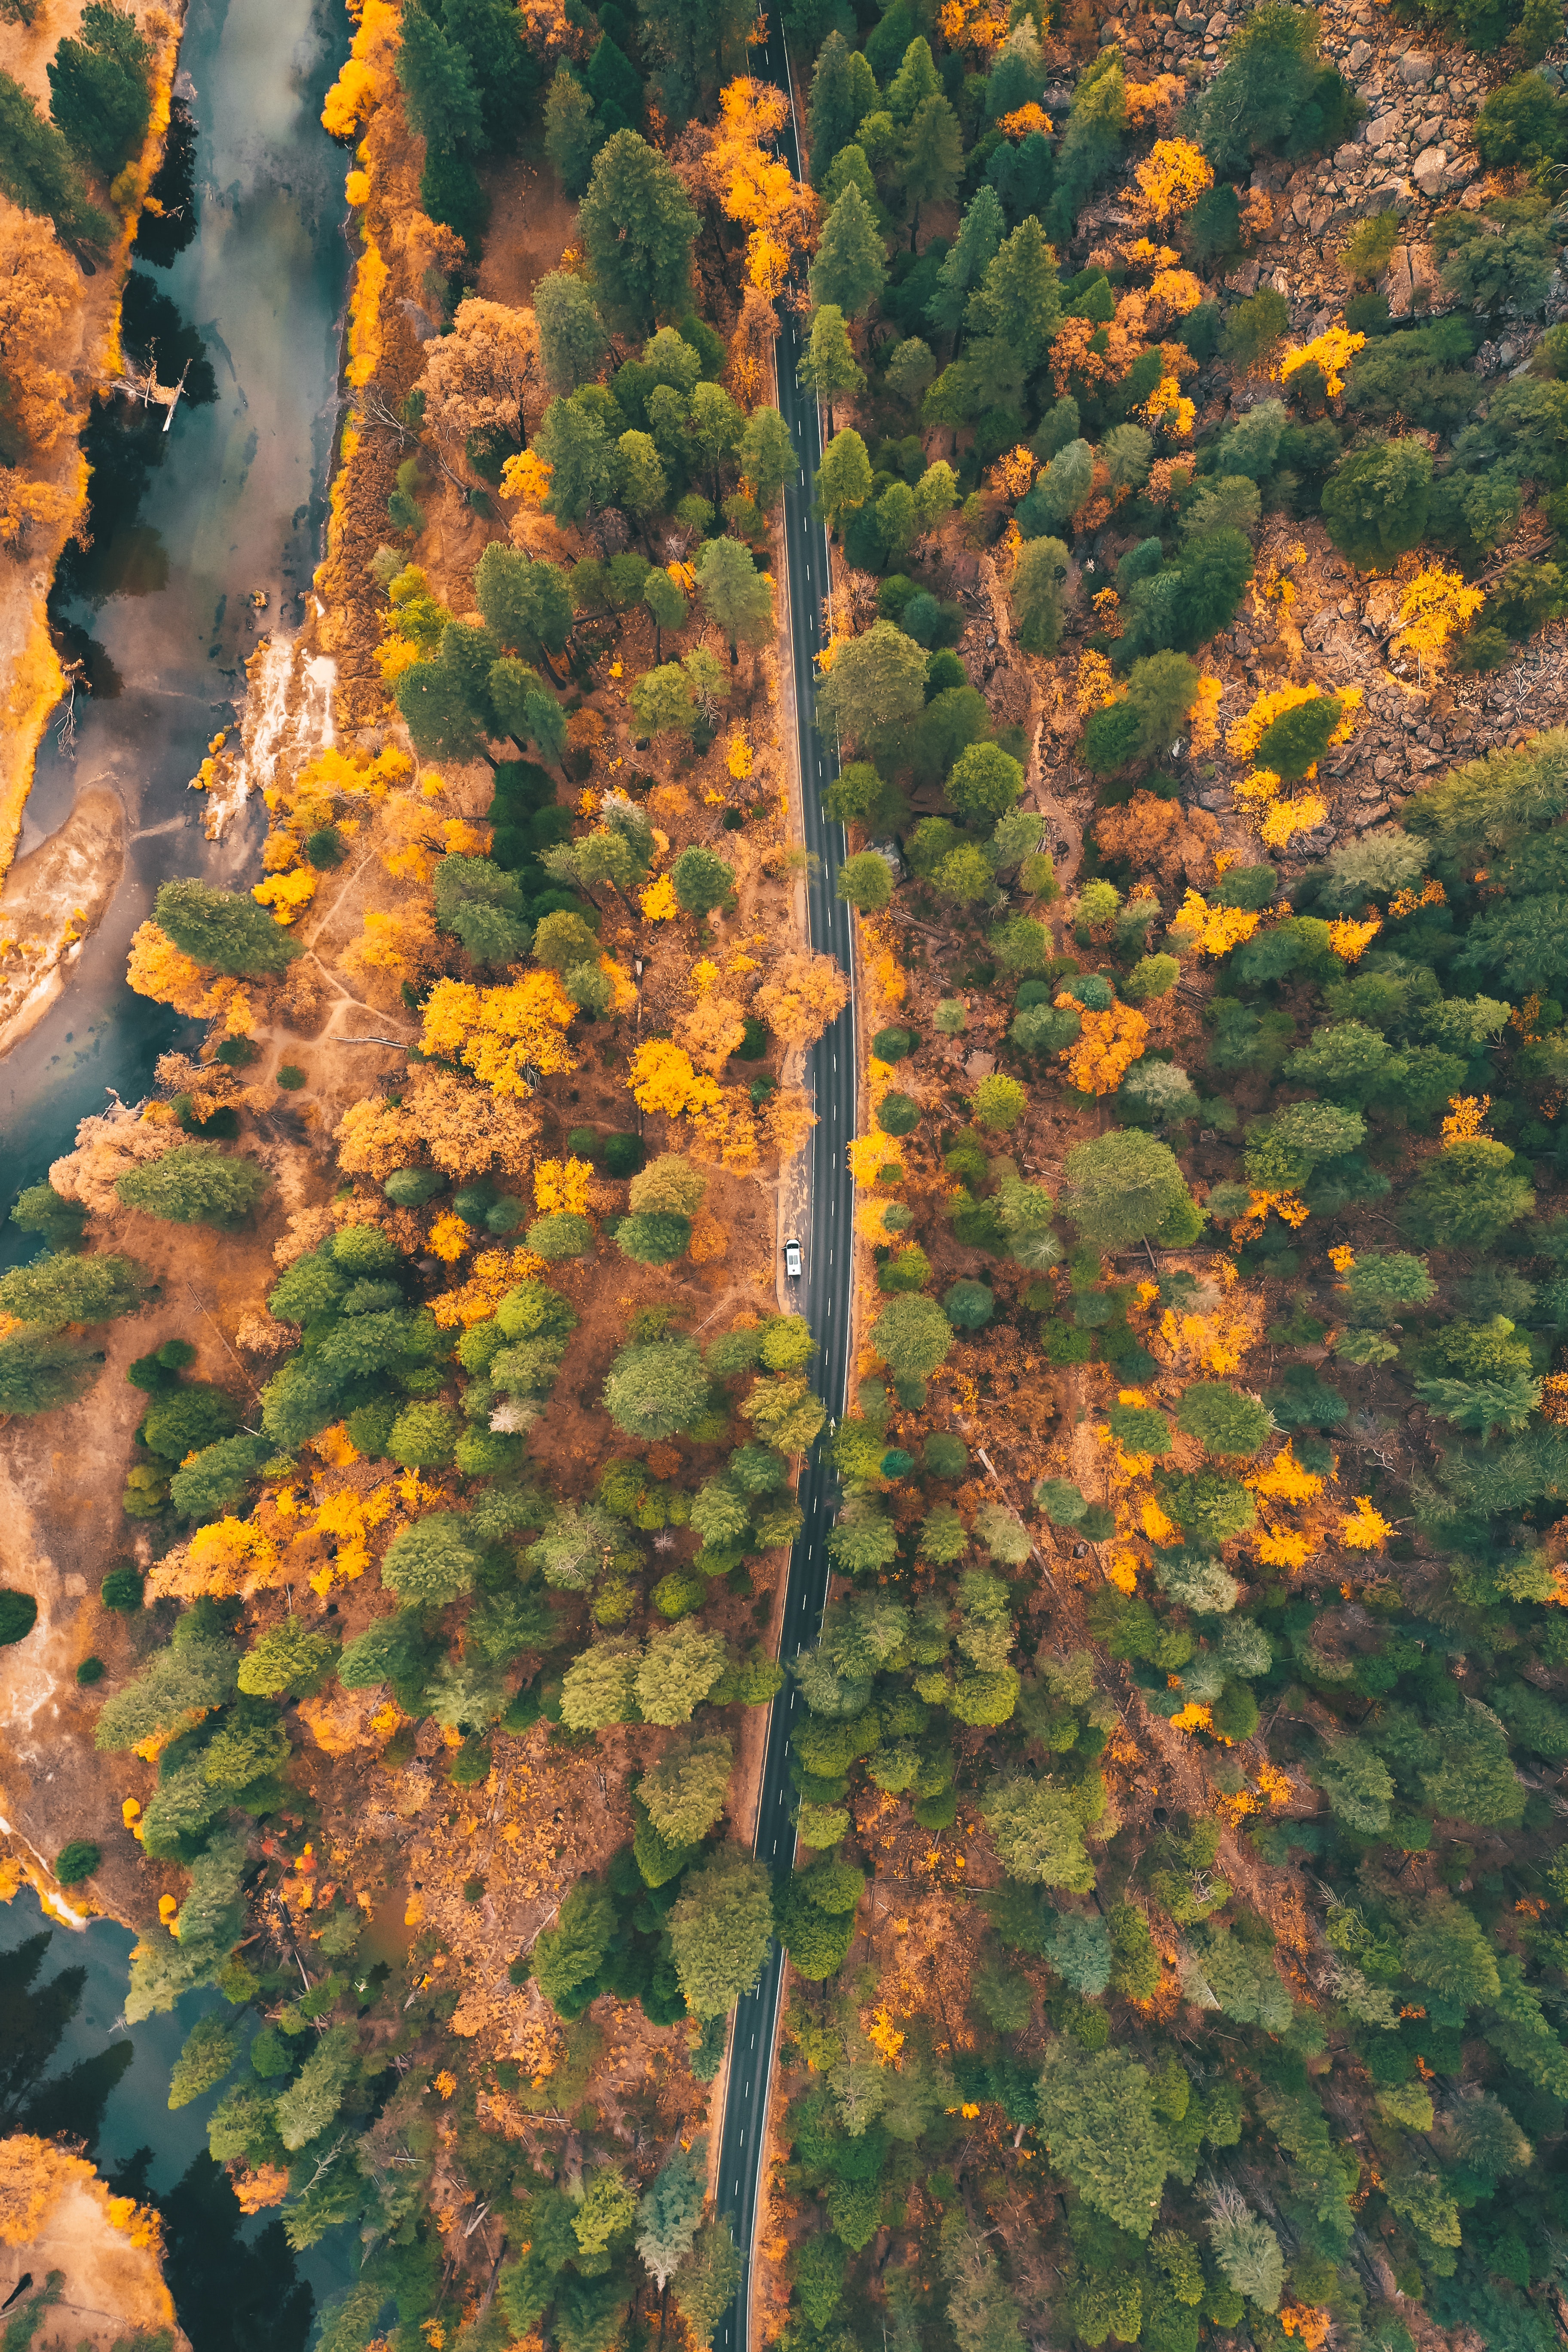 view from above, nature, trees, autumn, road, forest, car Full HD